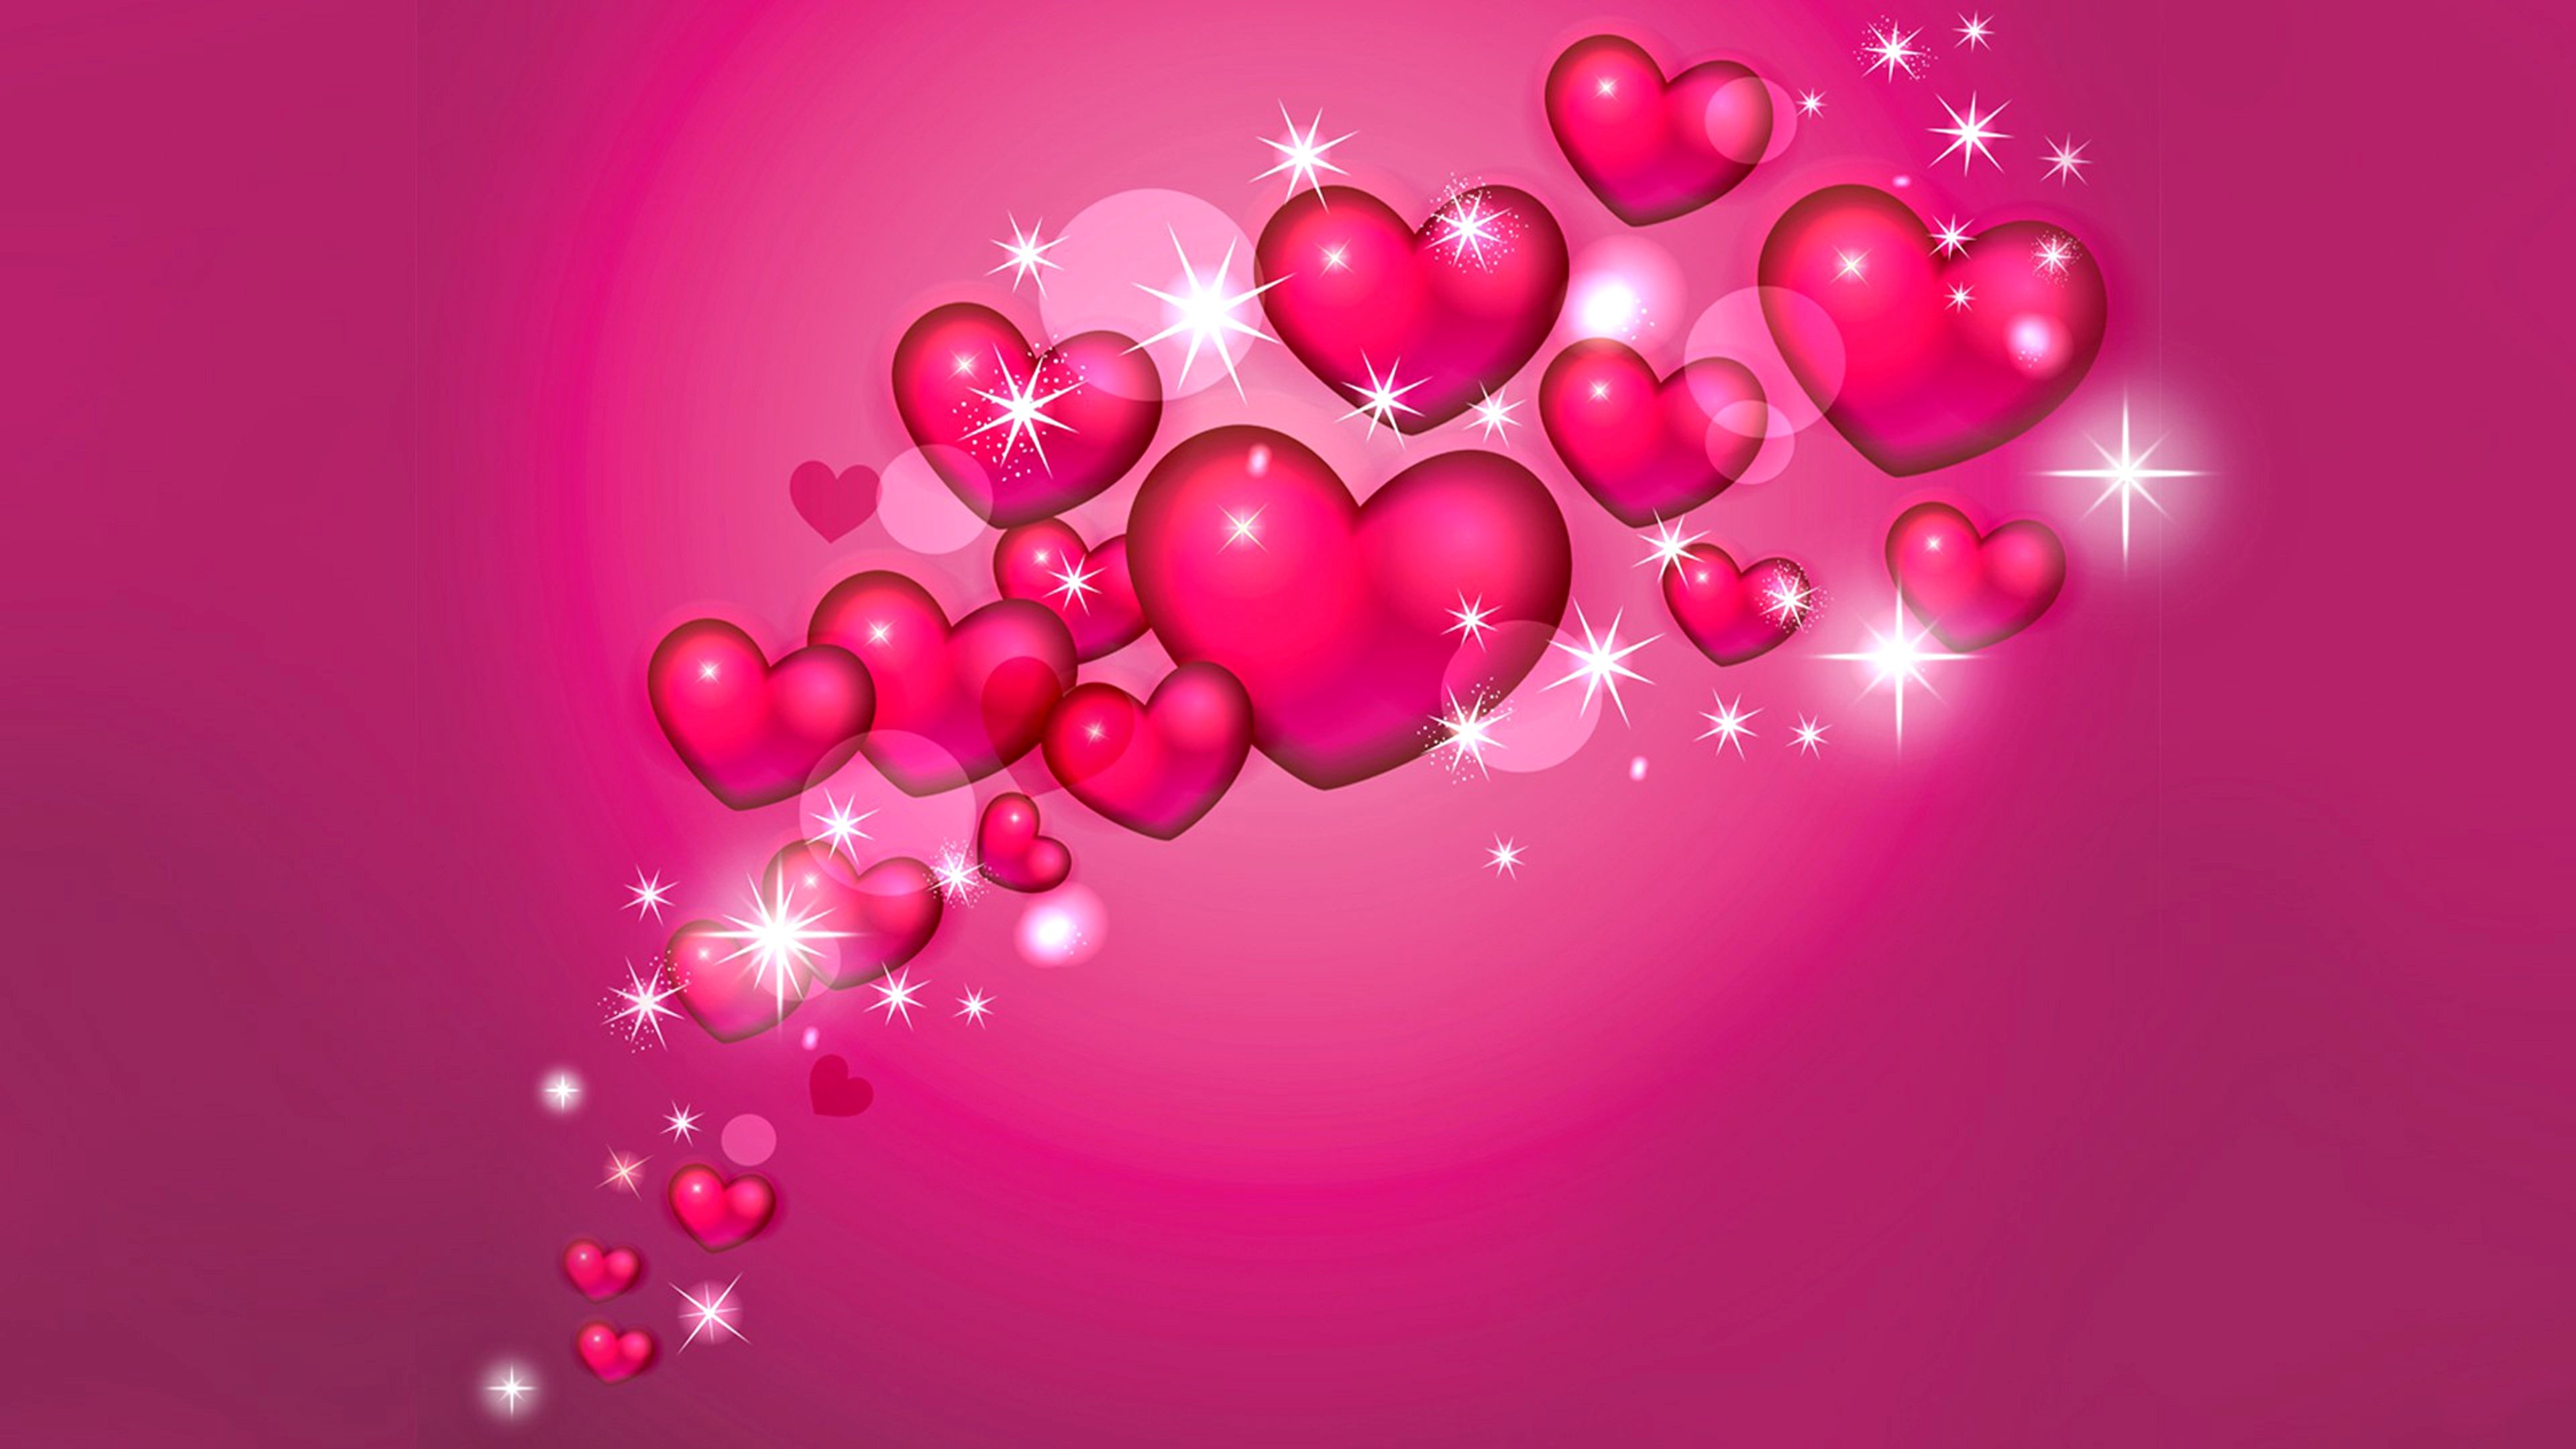 Heart Wallpaper Pictures Image